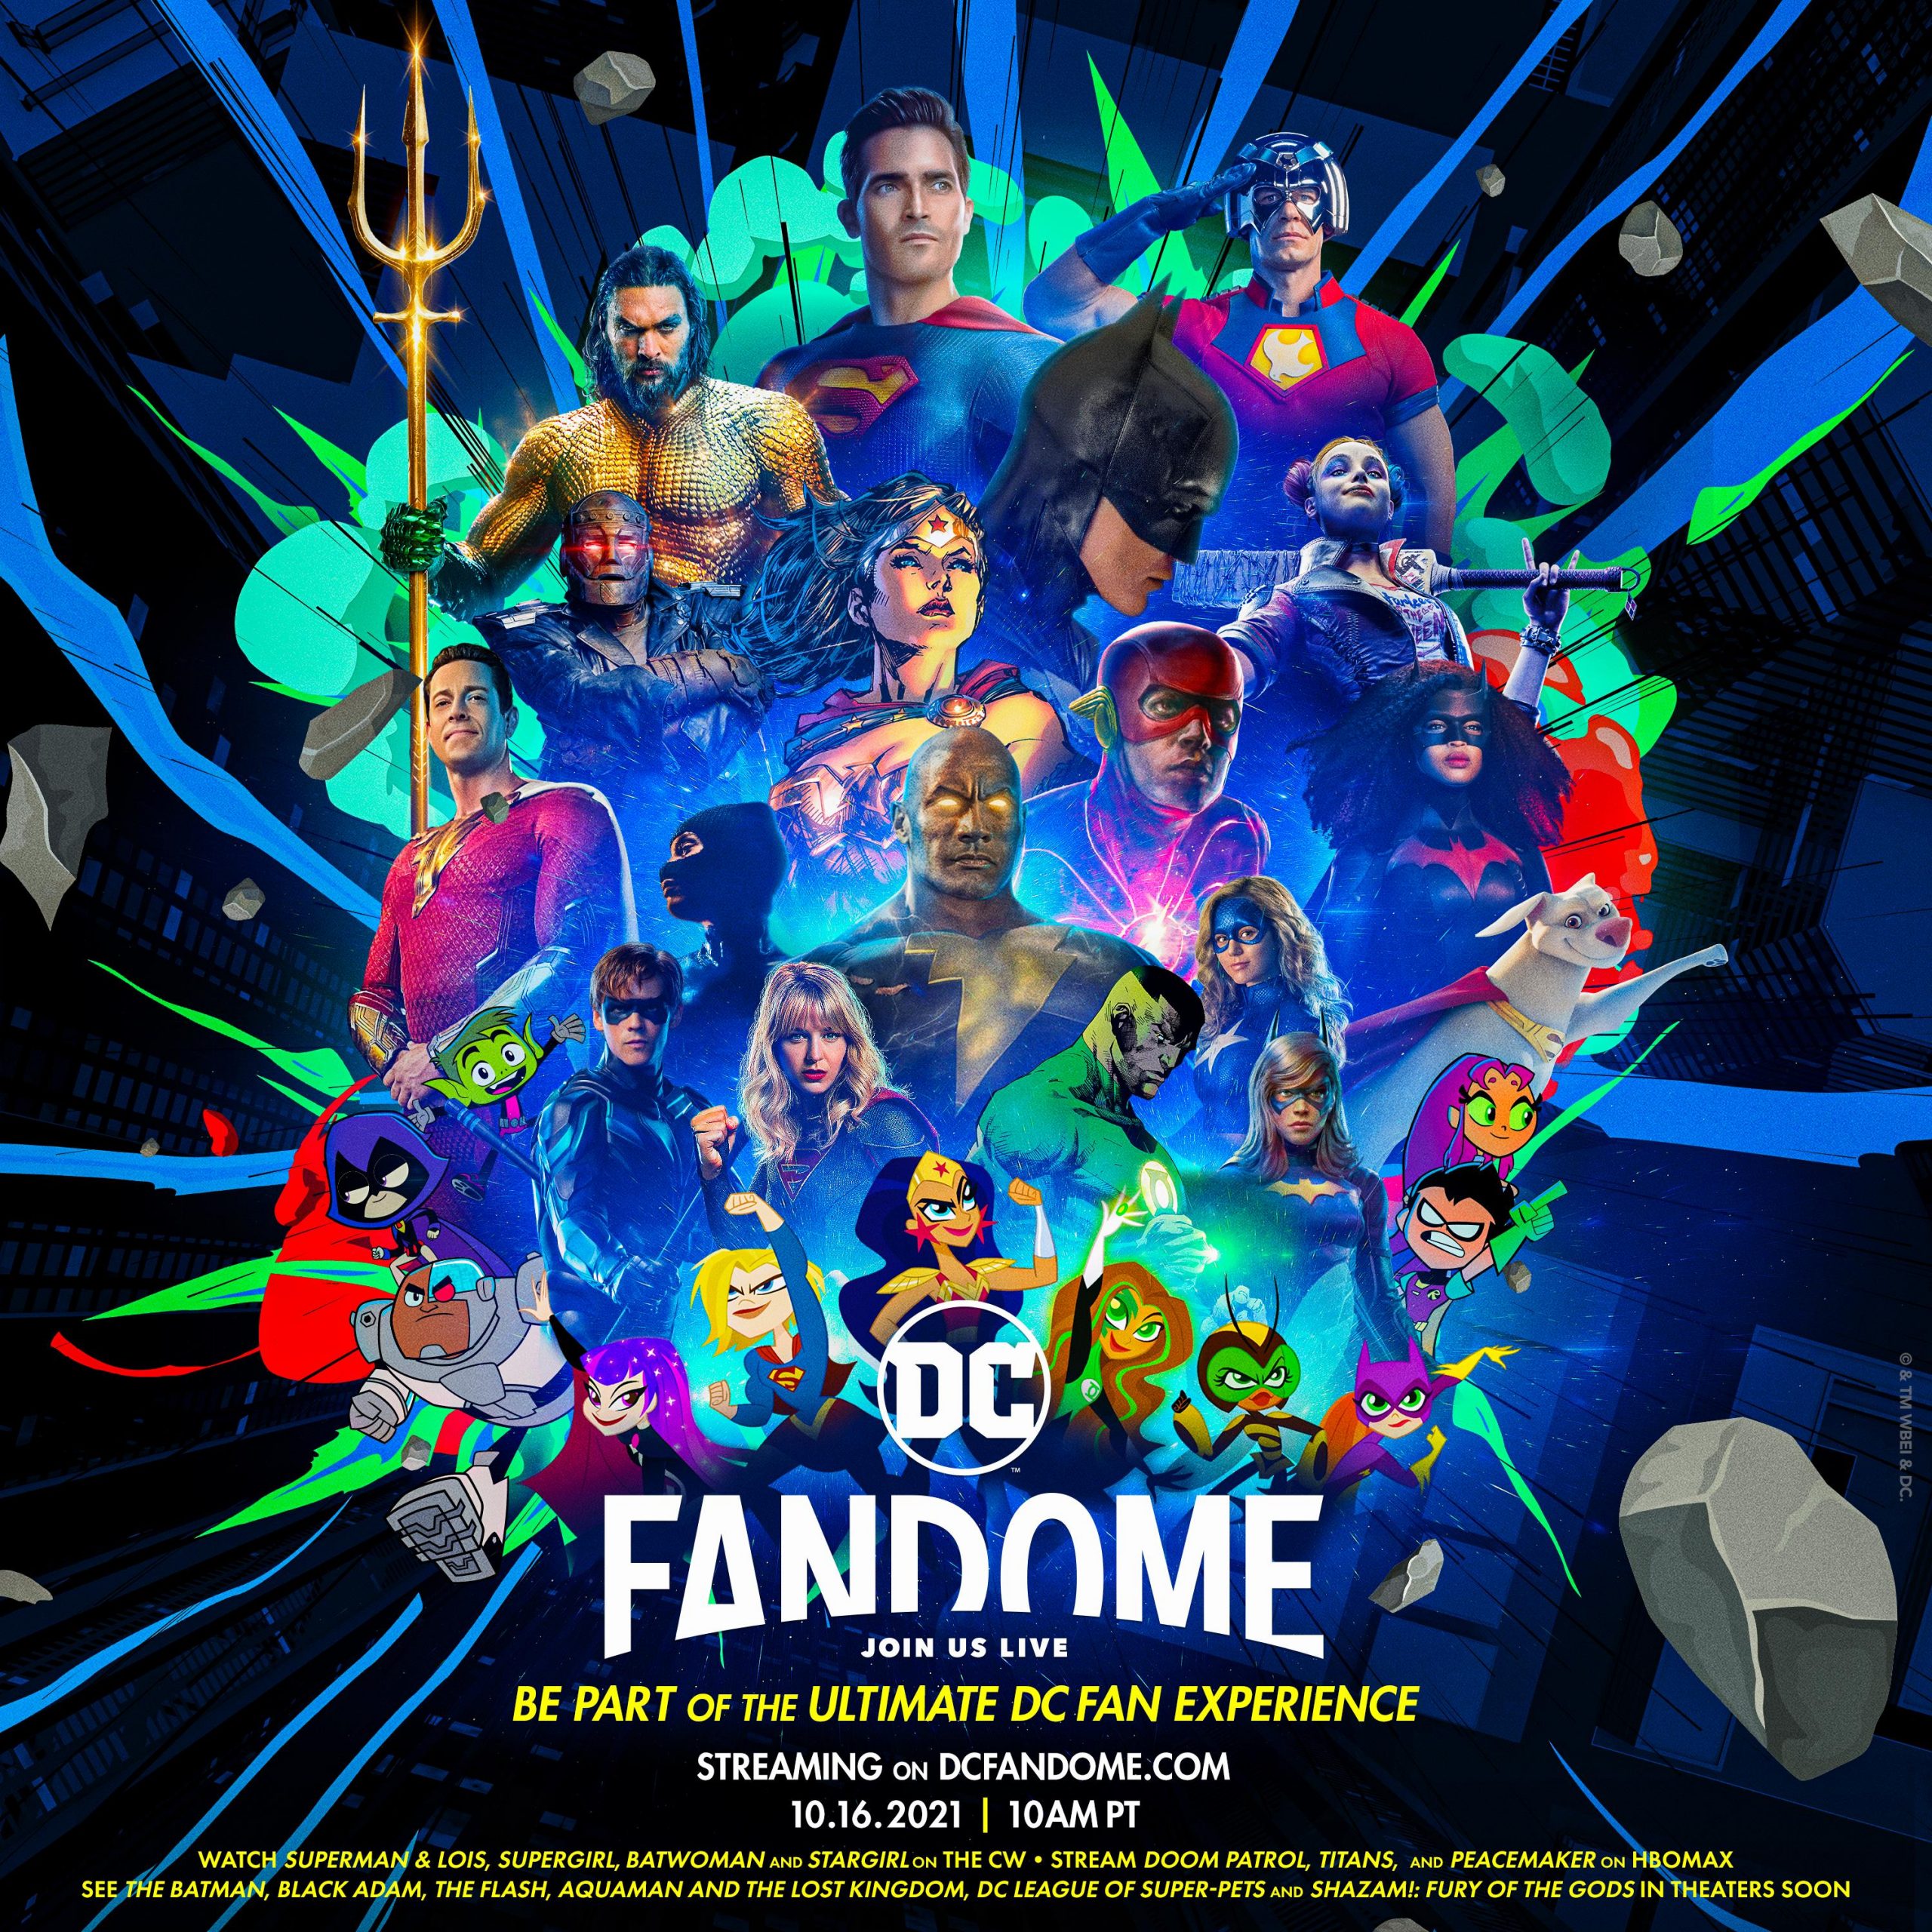 DC FanDome triples views to 66 million for its October 16 virtual event